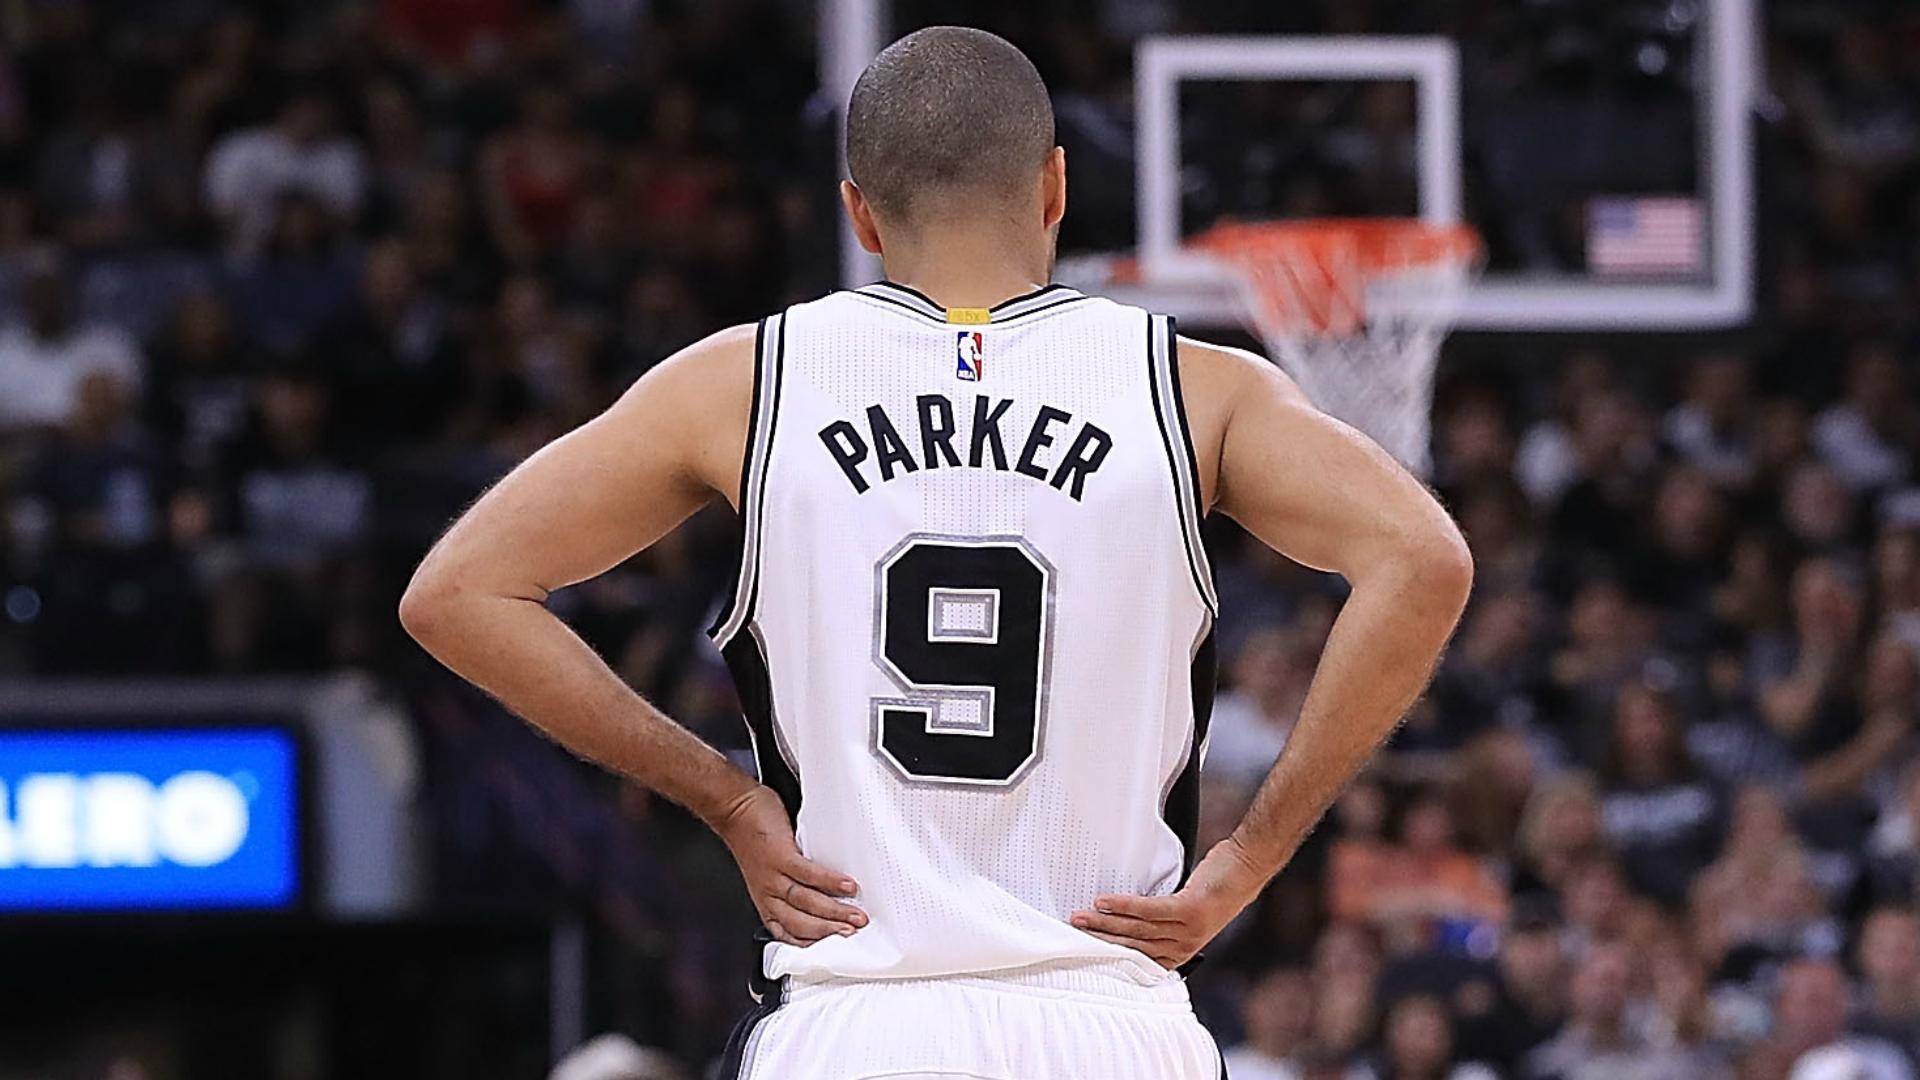 Tony Parker retires from NBA after 18 seasons. BASKETBALL News